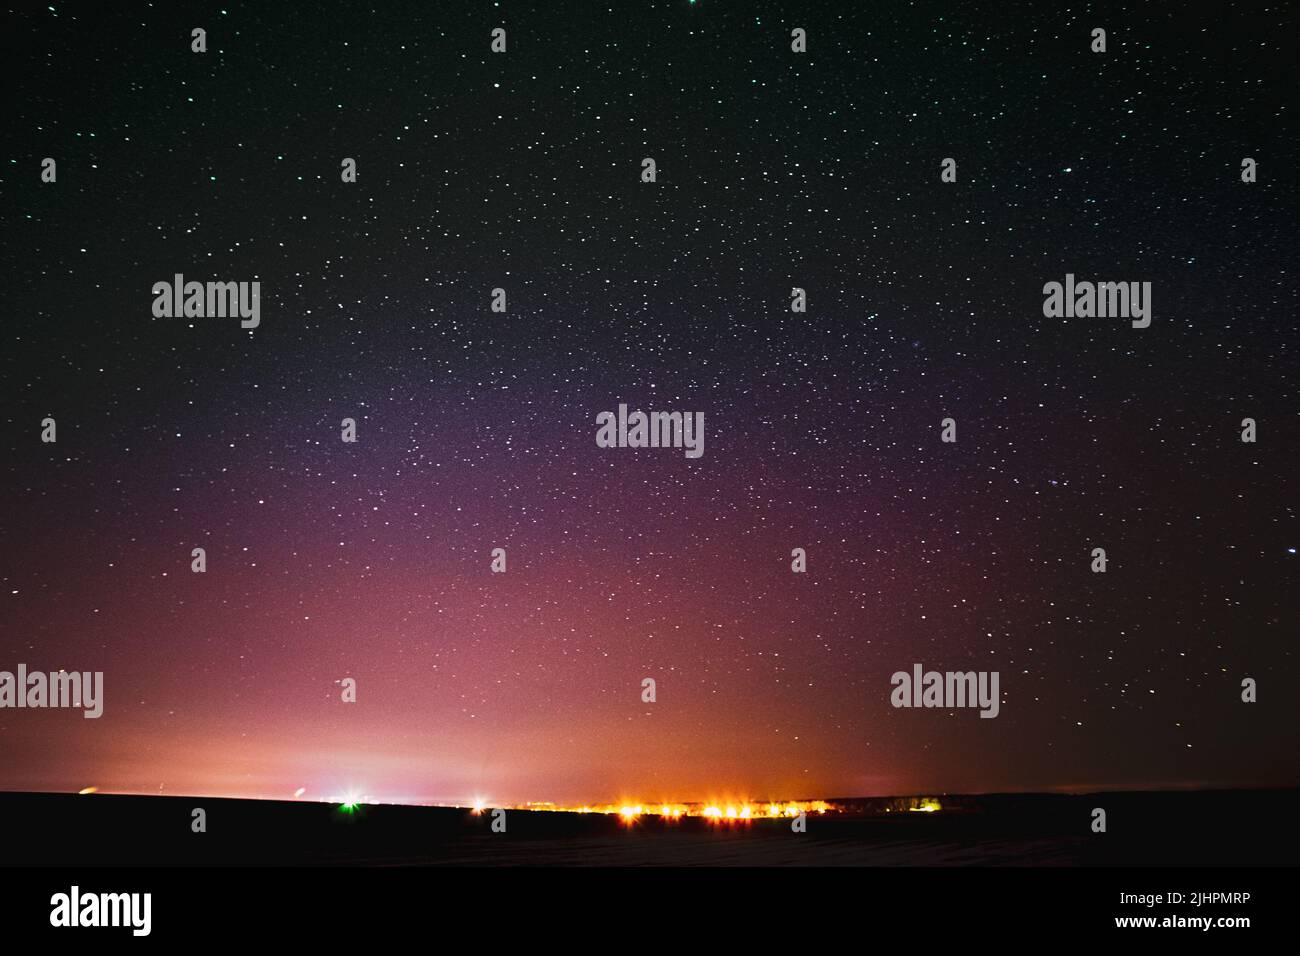 Beautiful Colorful Night Sky Glowing Stars Background Backdrop With Gradient. Sunset Sunrise Lights And Night Starry Sky In Yellow Pink Purple Colors Stock Photo